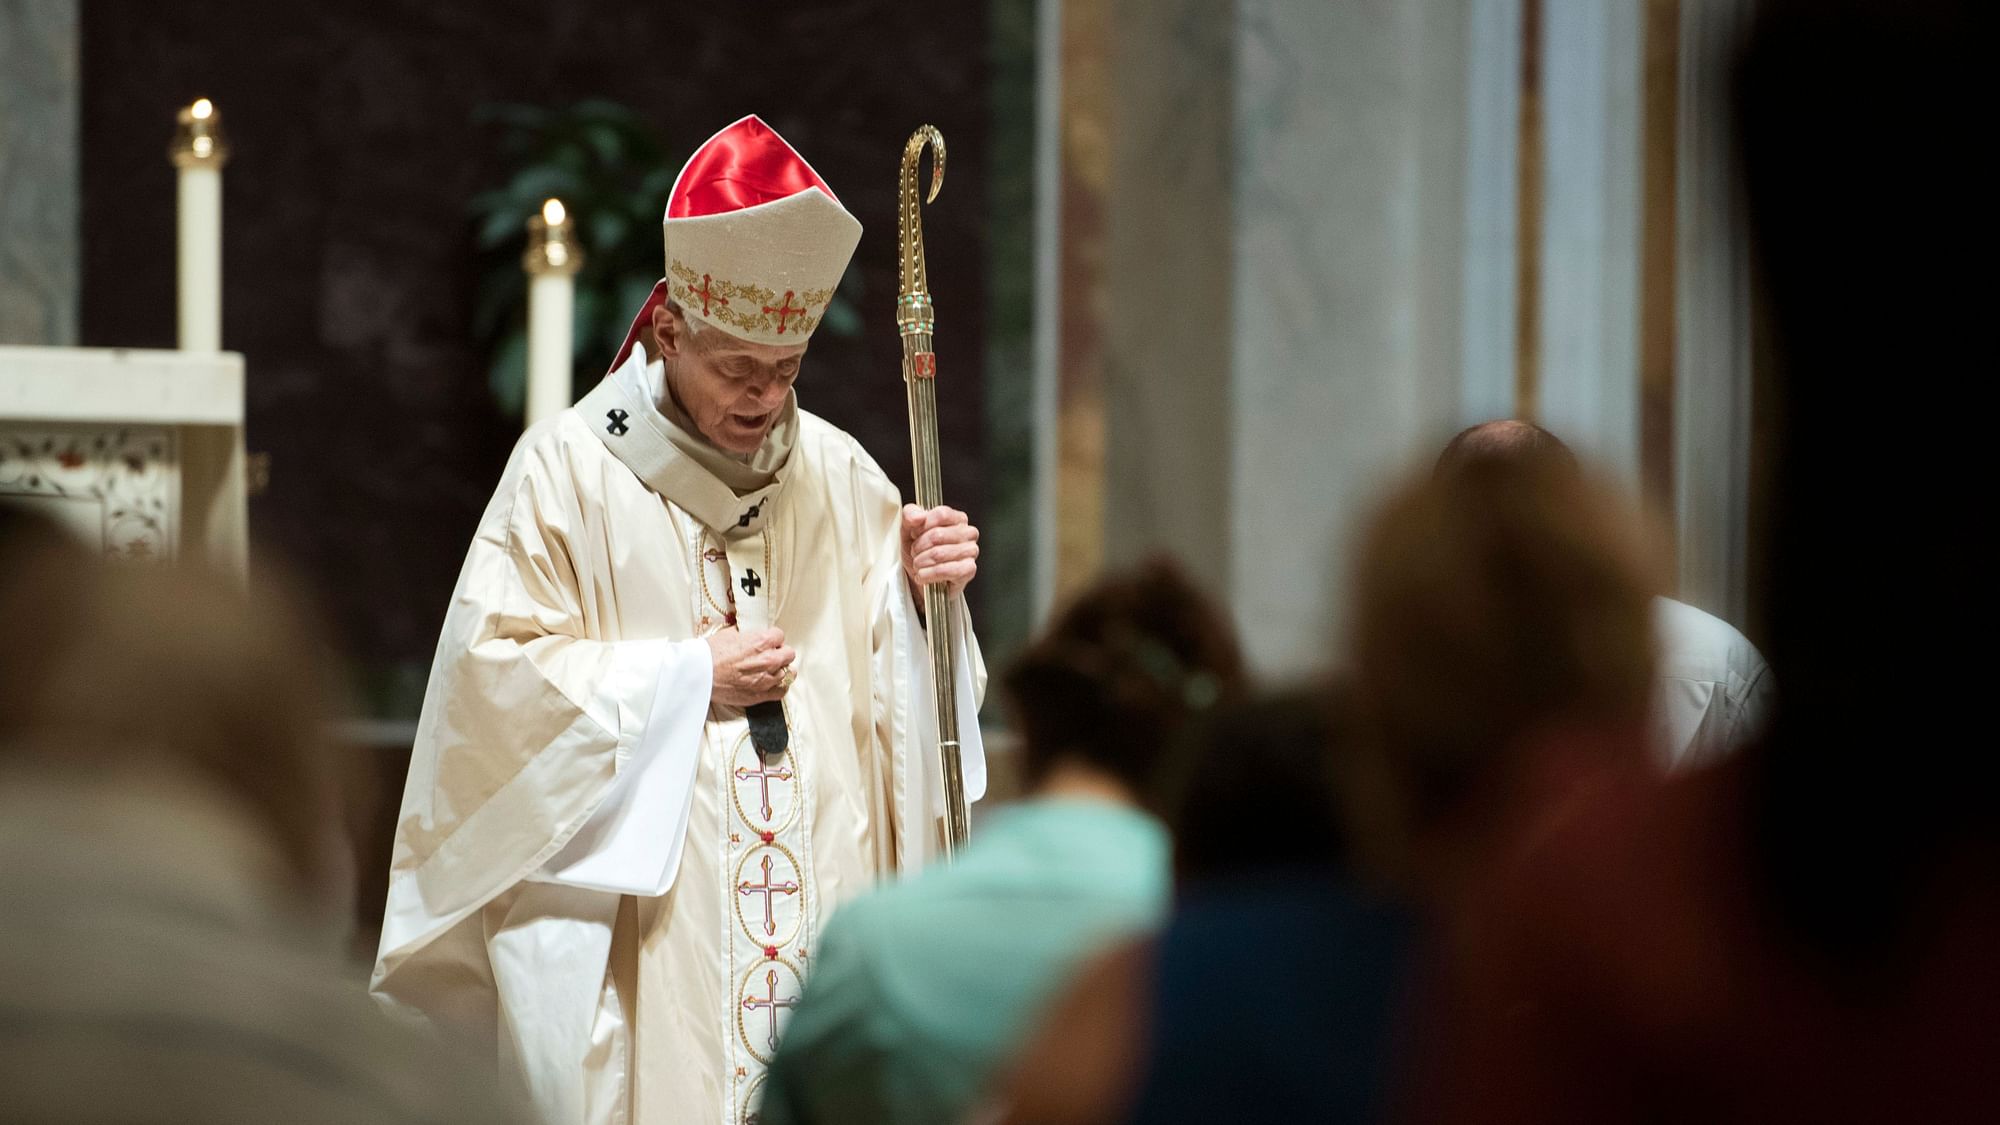 Over the past four months, Roman Catholic dioceses across the US have released the names of more than 1,000 priests and others accused of sexually abusing children.